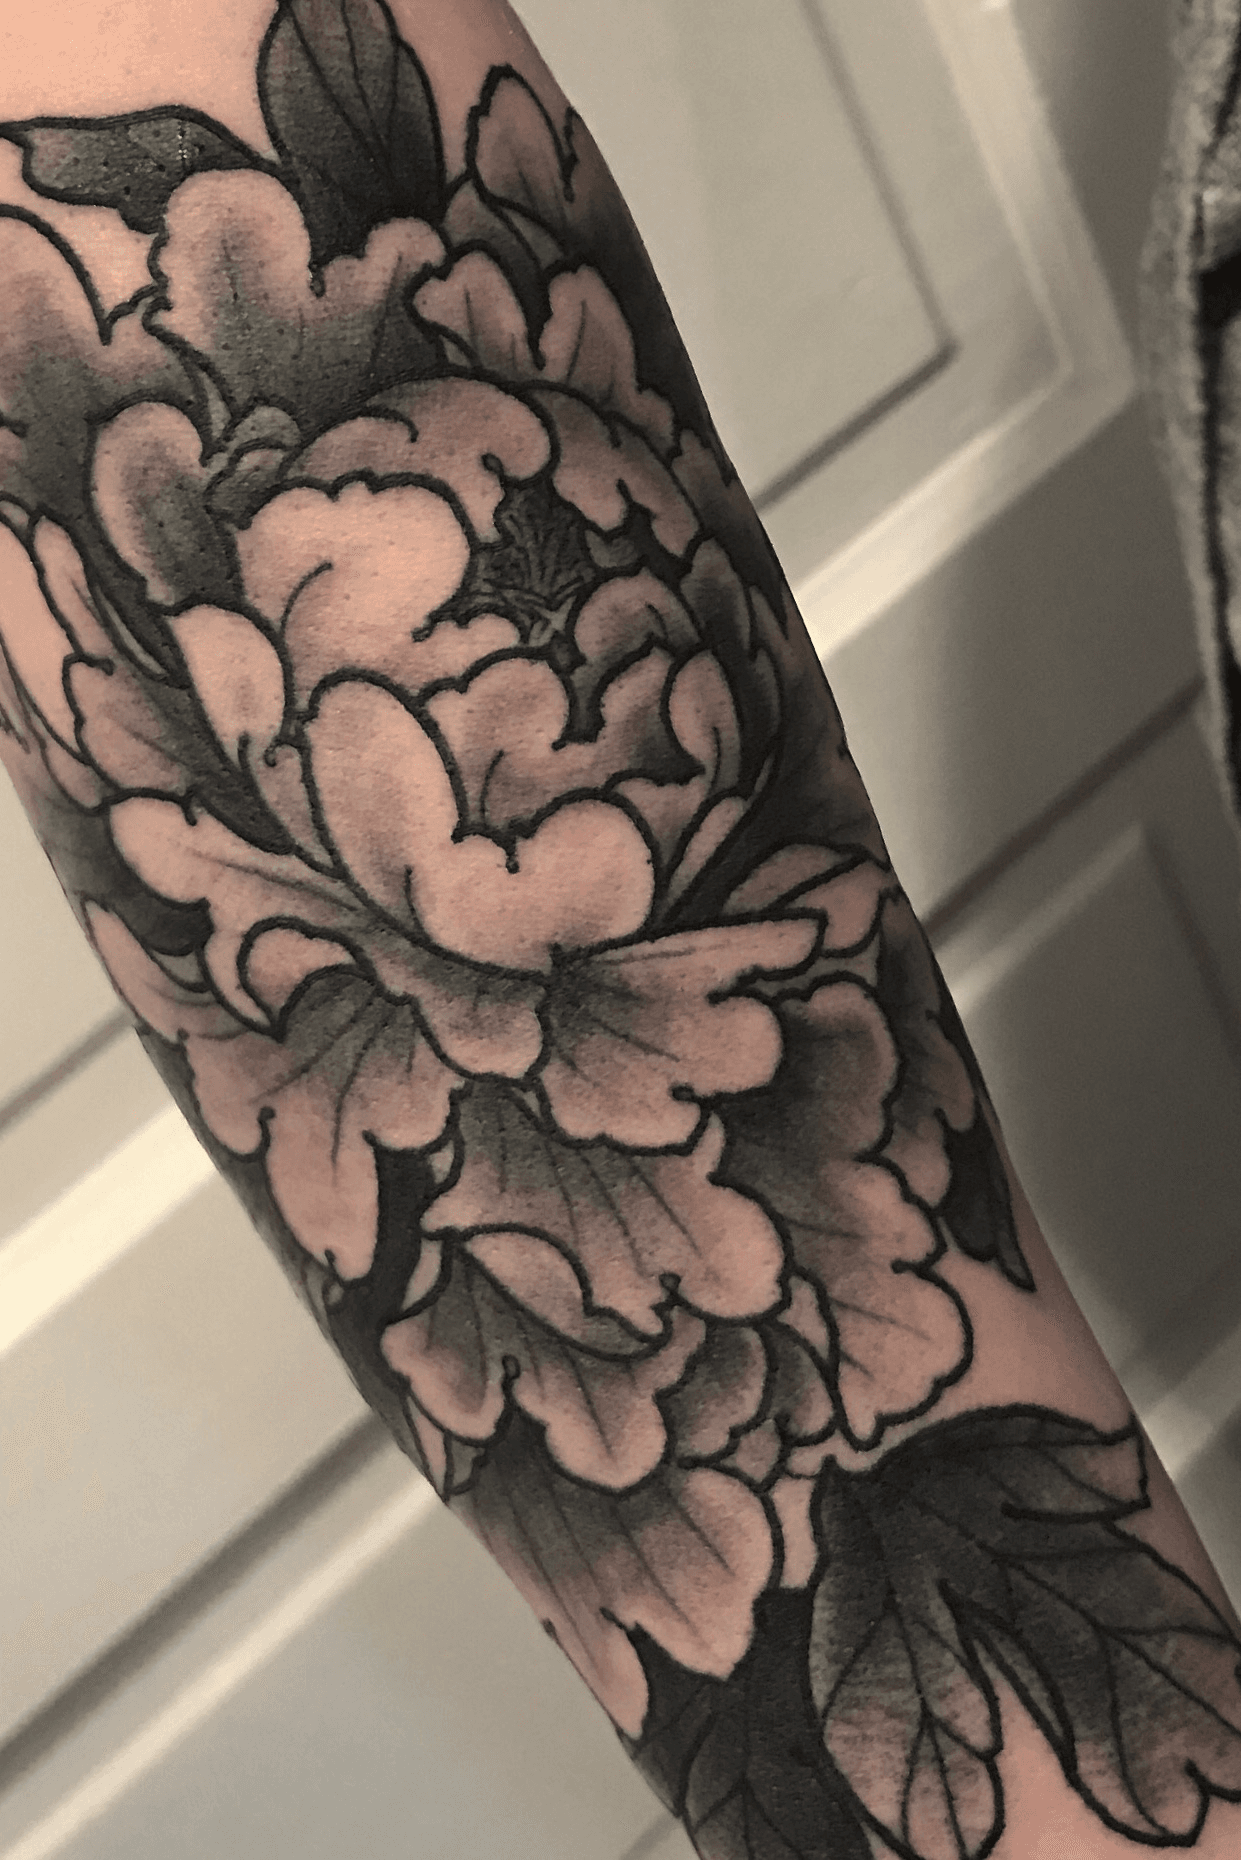 Tommy Rattle tattoos  Neotraditional peony behind the knee Shit spot  hard to get a good pic cos it wraps But Id love to do more of these  Thanks for sitting like